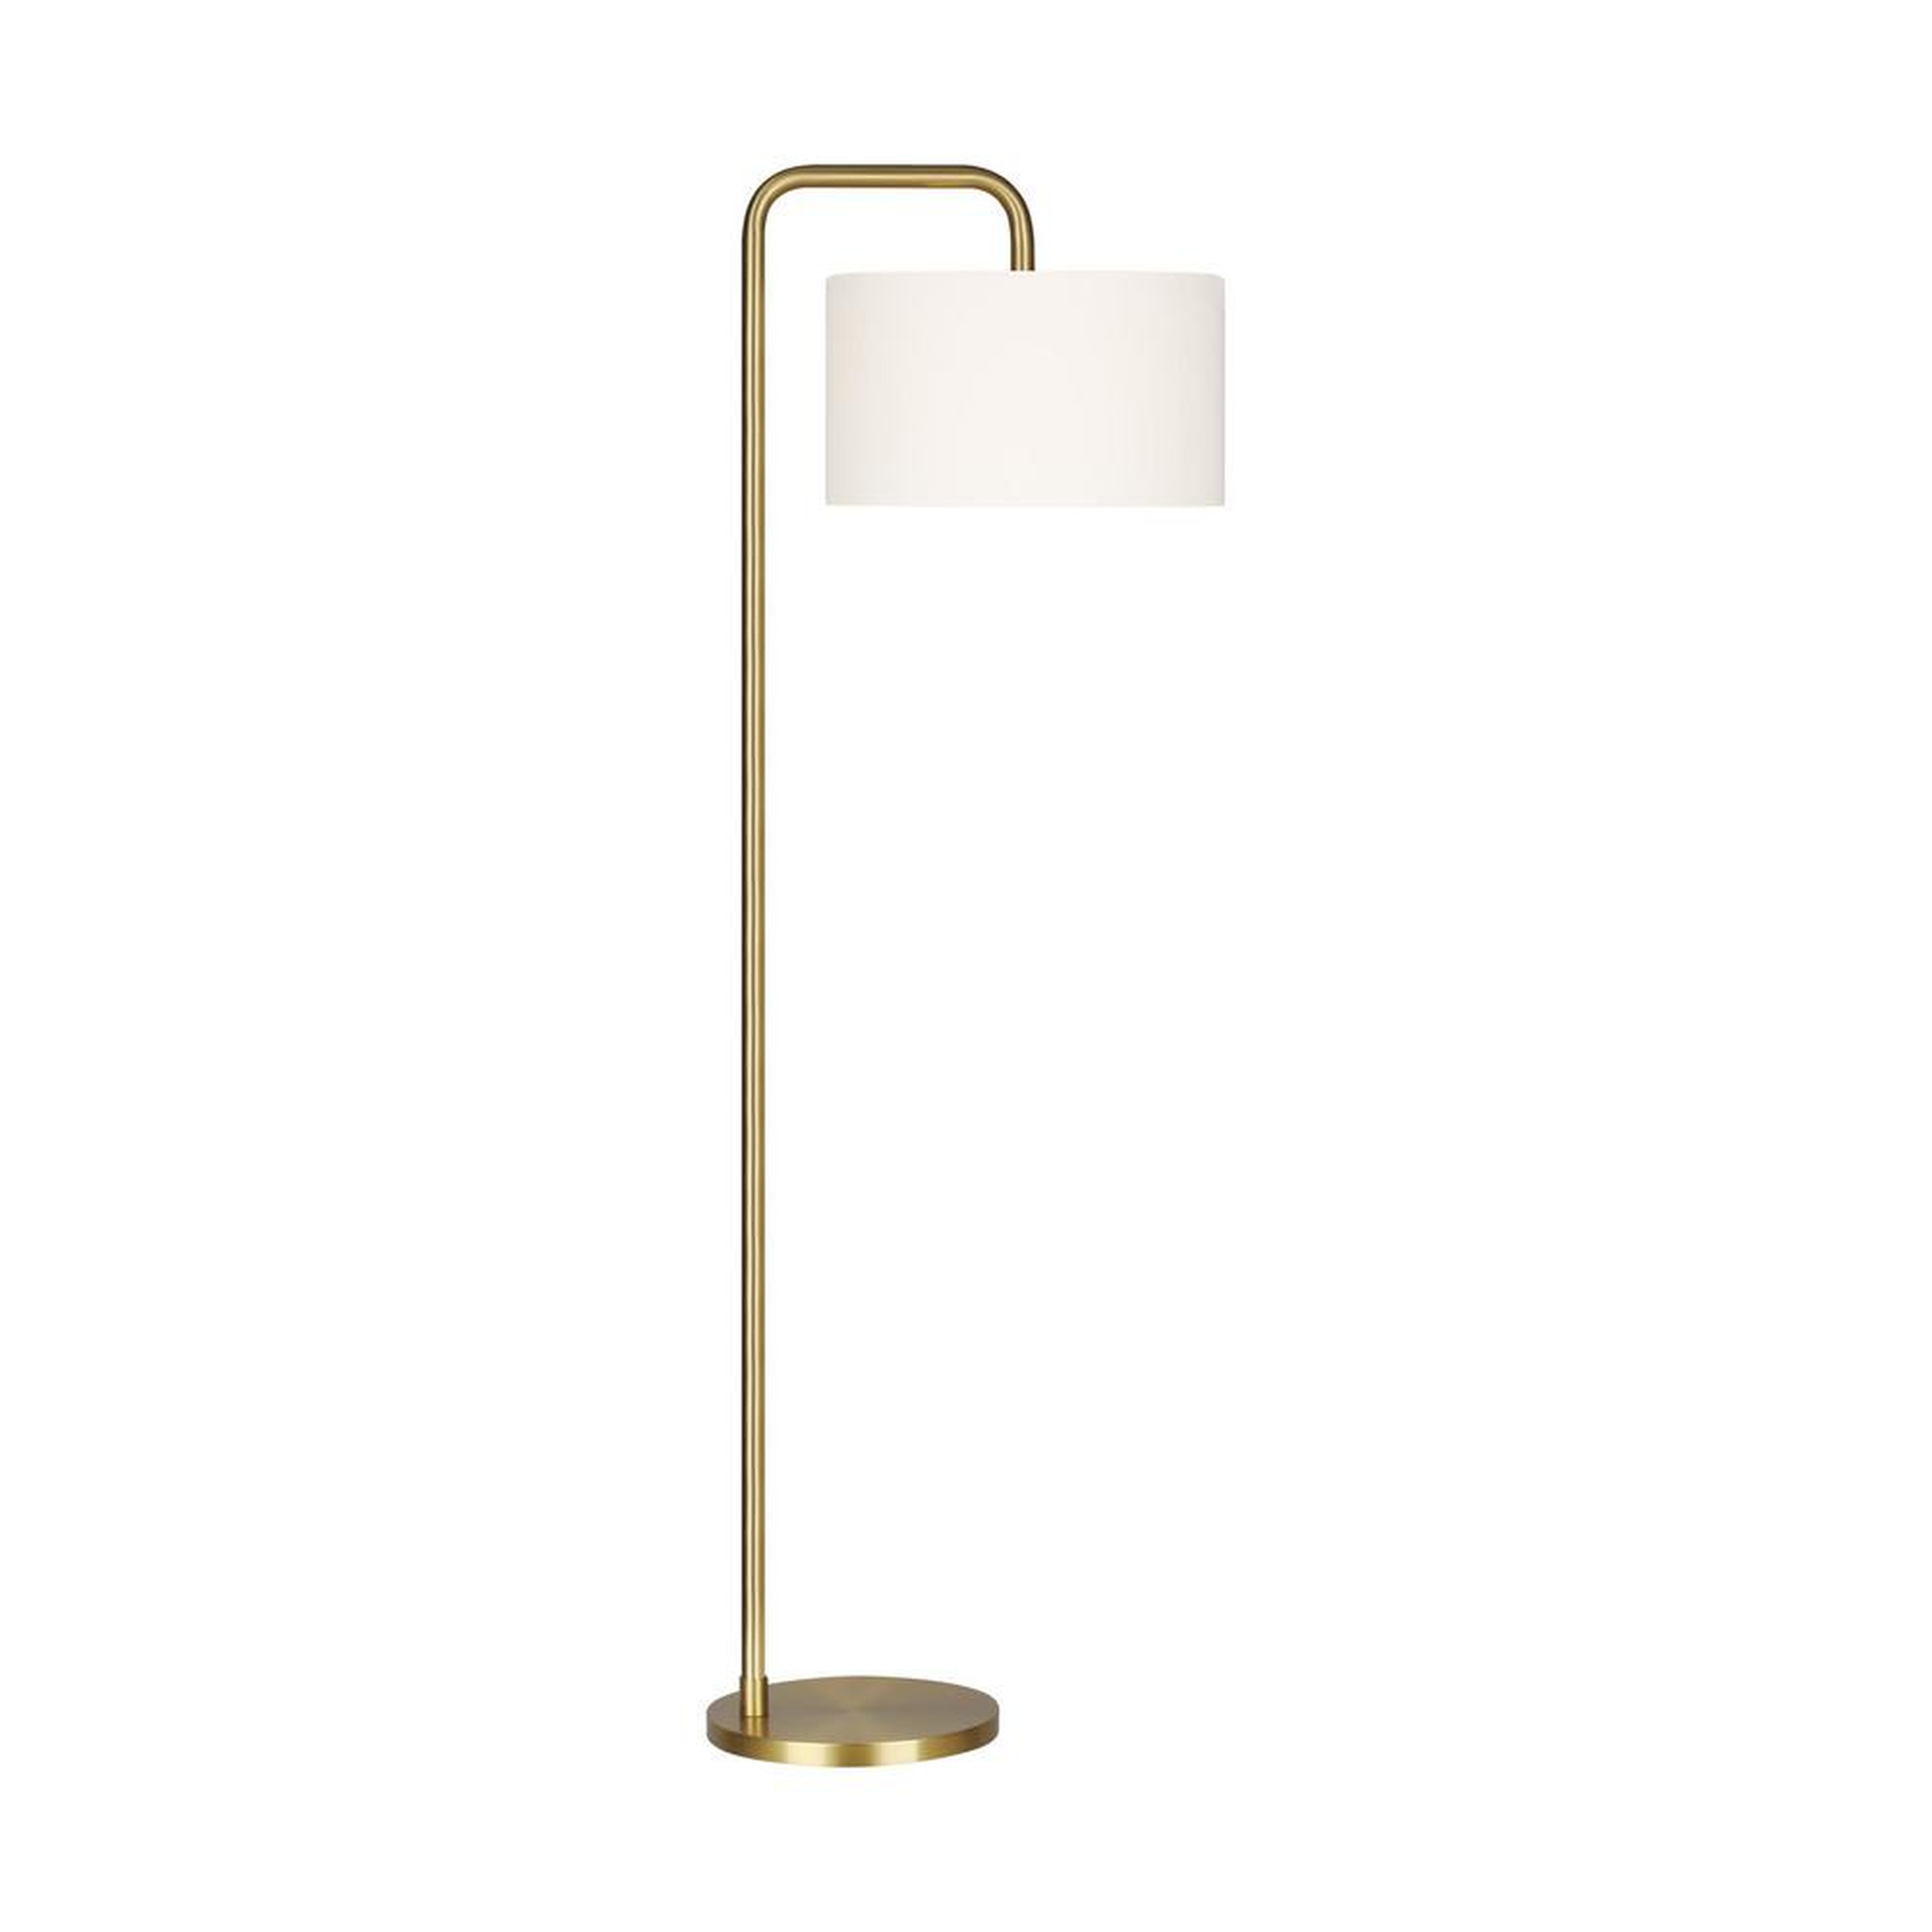 Sea Gull Lighting Products Dean 64 in. Burnished Brass Floor Lamp with White Linen Fabric Shade - Home Depot